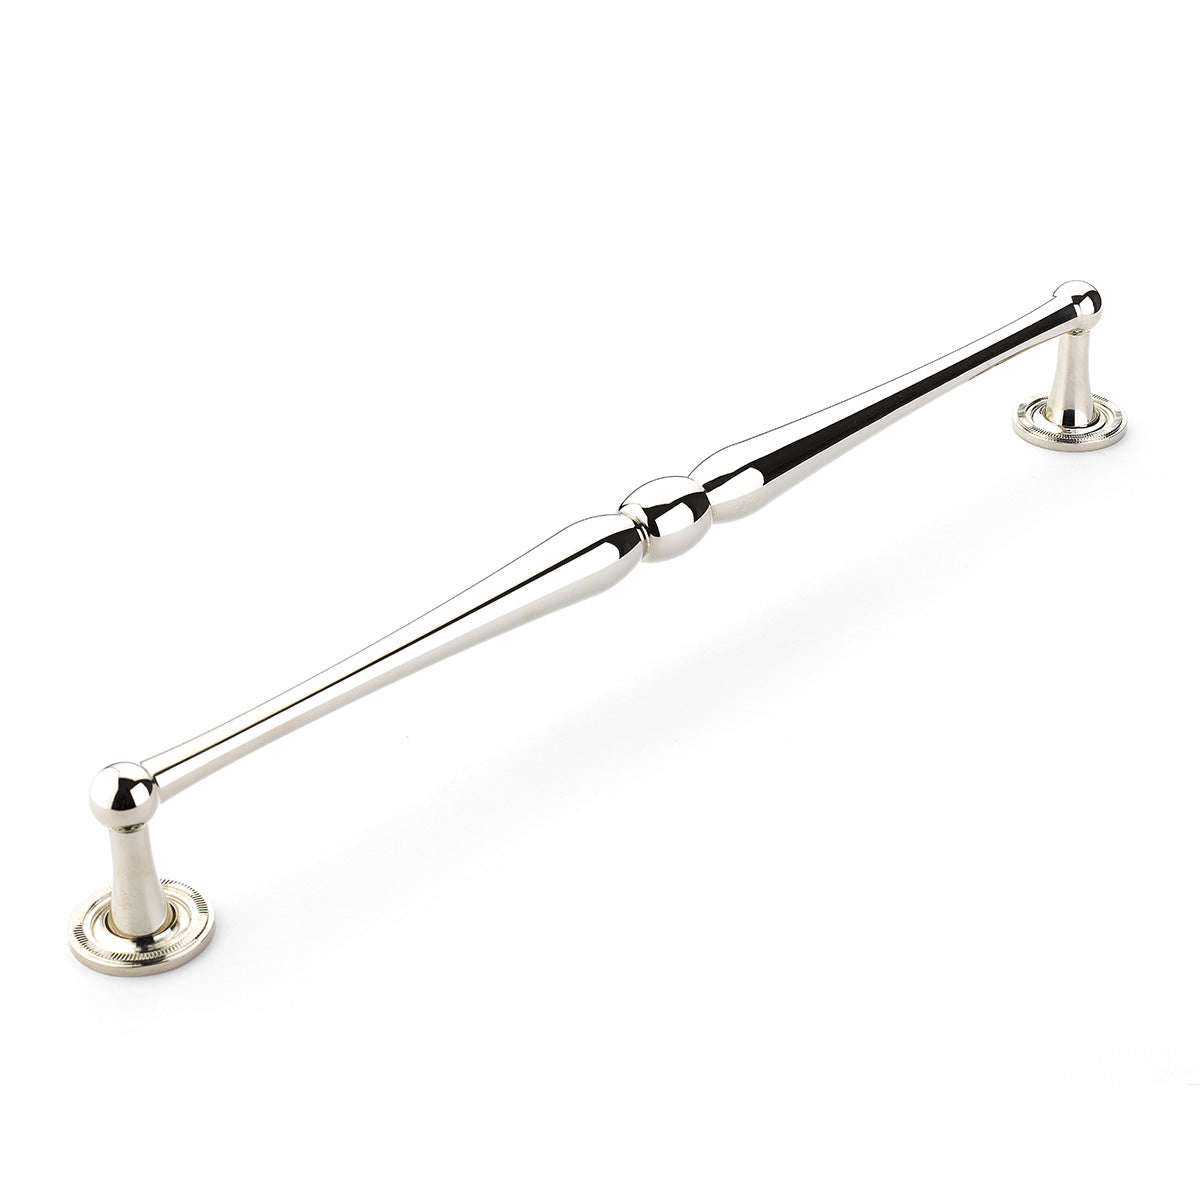 15 3/4 Inch (15 Inch c-c) Atherton Appliance Pull with Knurled Footplates (Polished Nickel Finish)